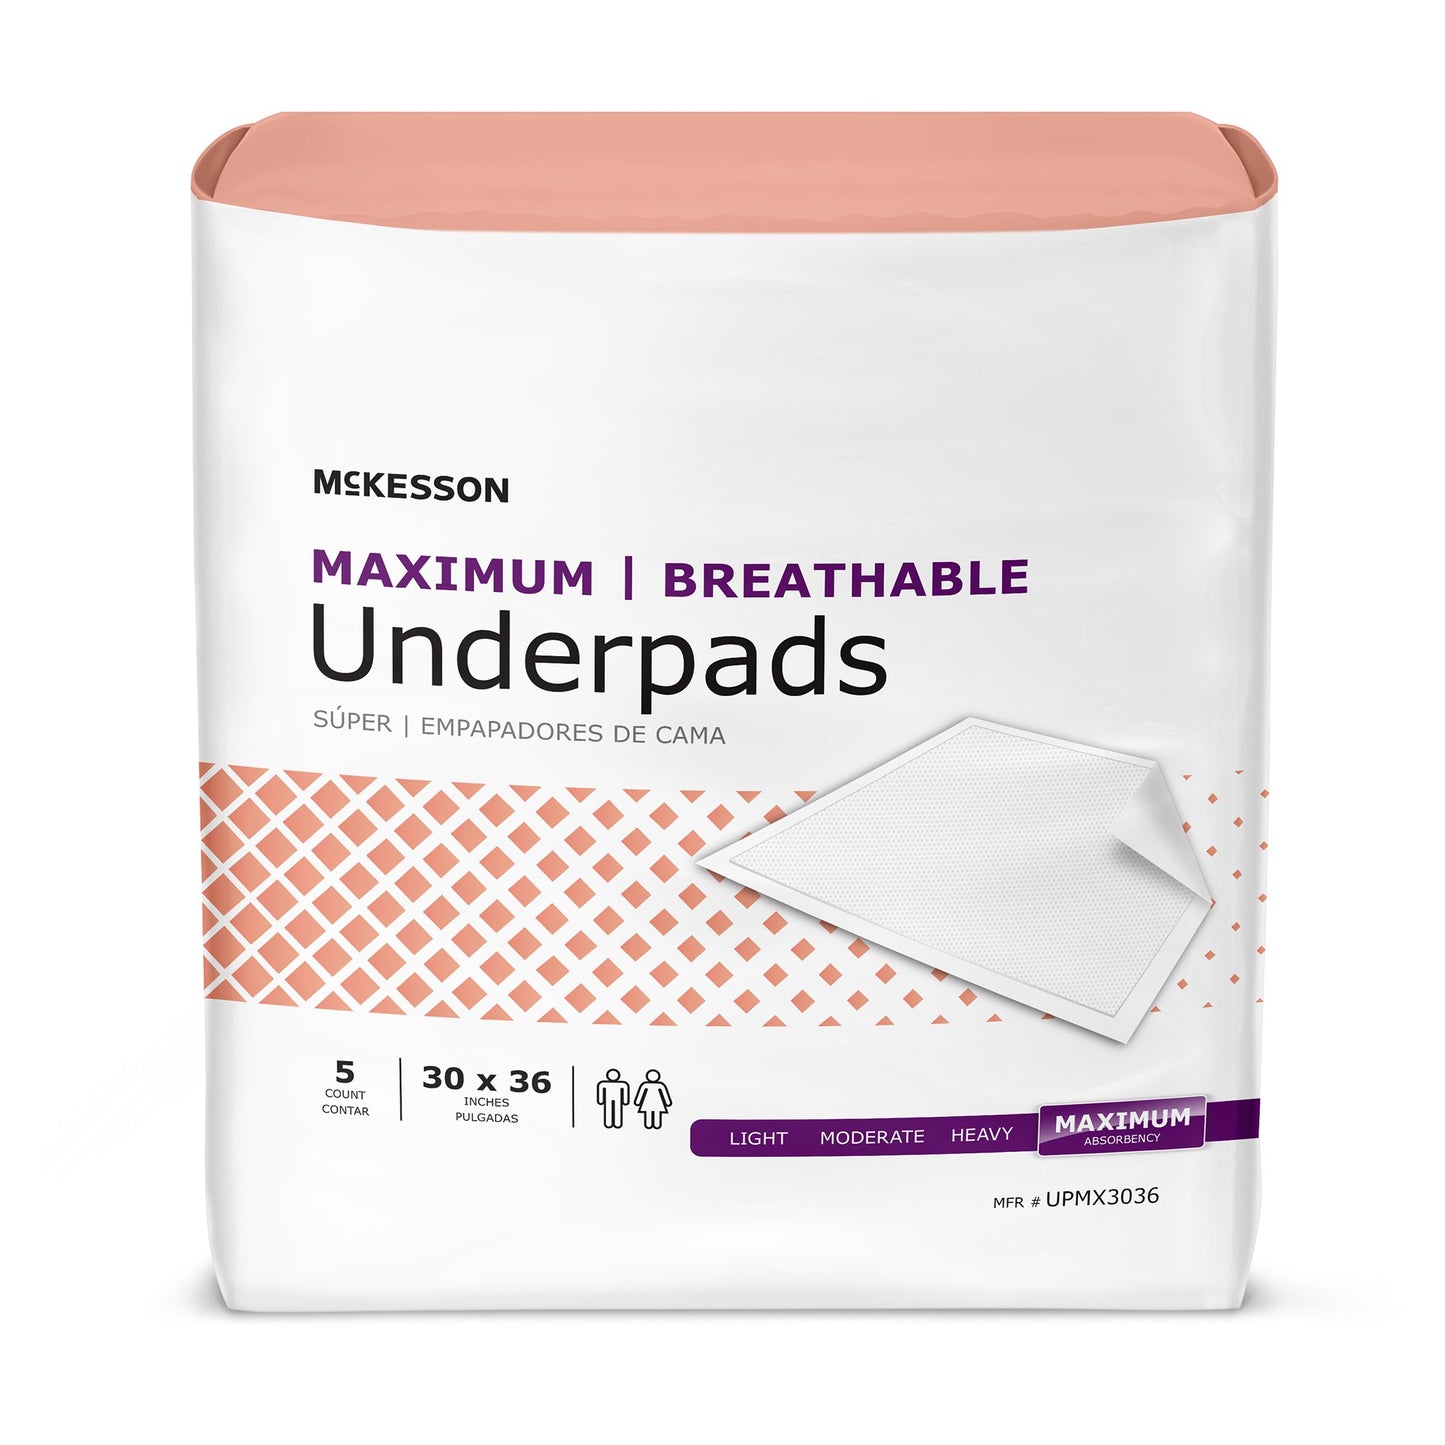 McKesson Ultimate Breathable Underpads, Maximum Protection, Heavy Absorbency, 30" x 36", White, 90 ct